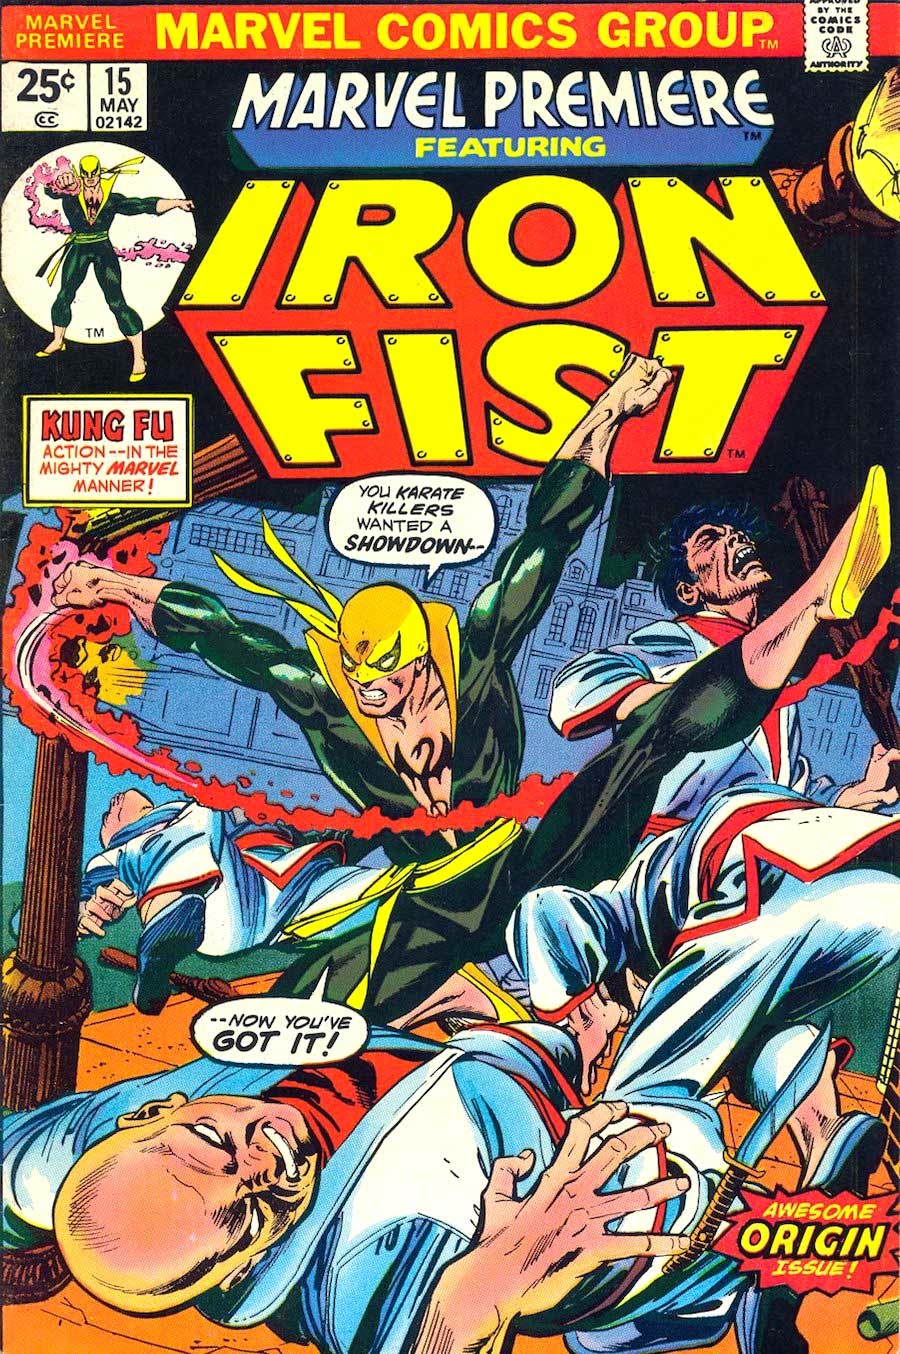 Marvel Premiere #15 key issue 1970s bronze age comic book cover - 1st appearance Iron Fist